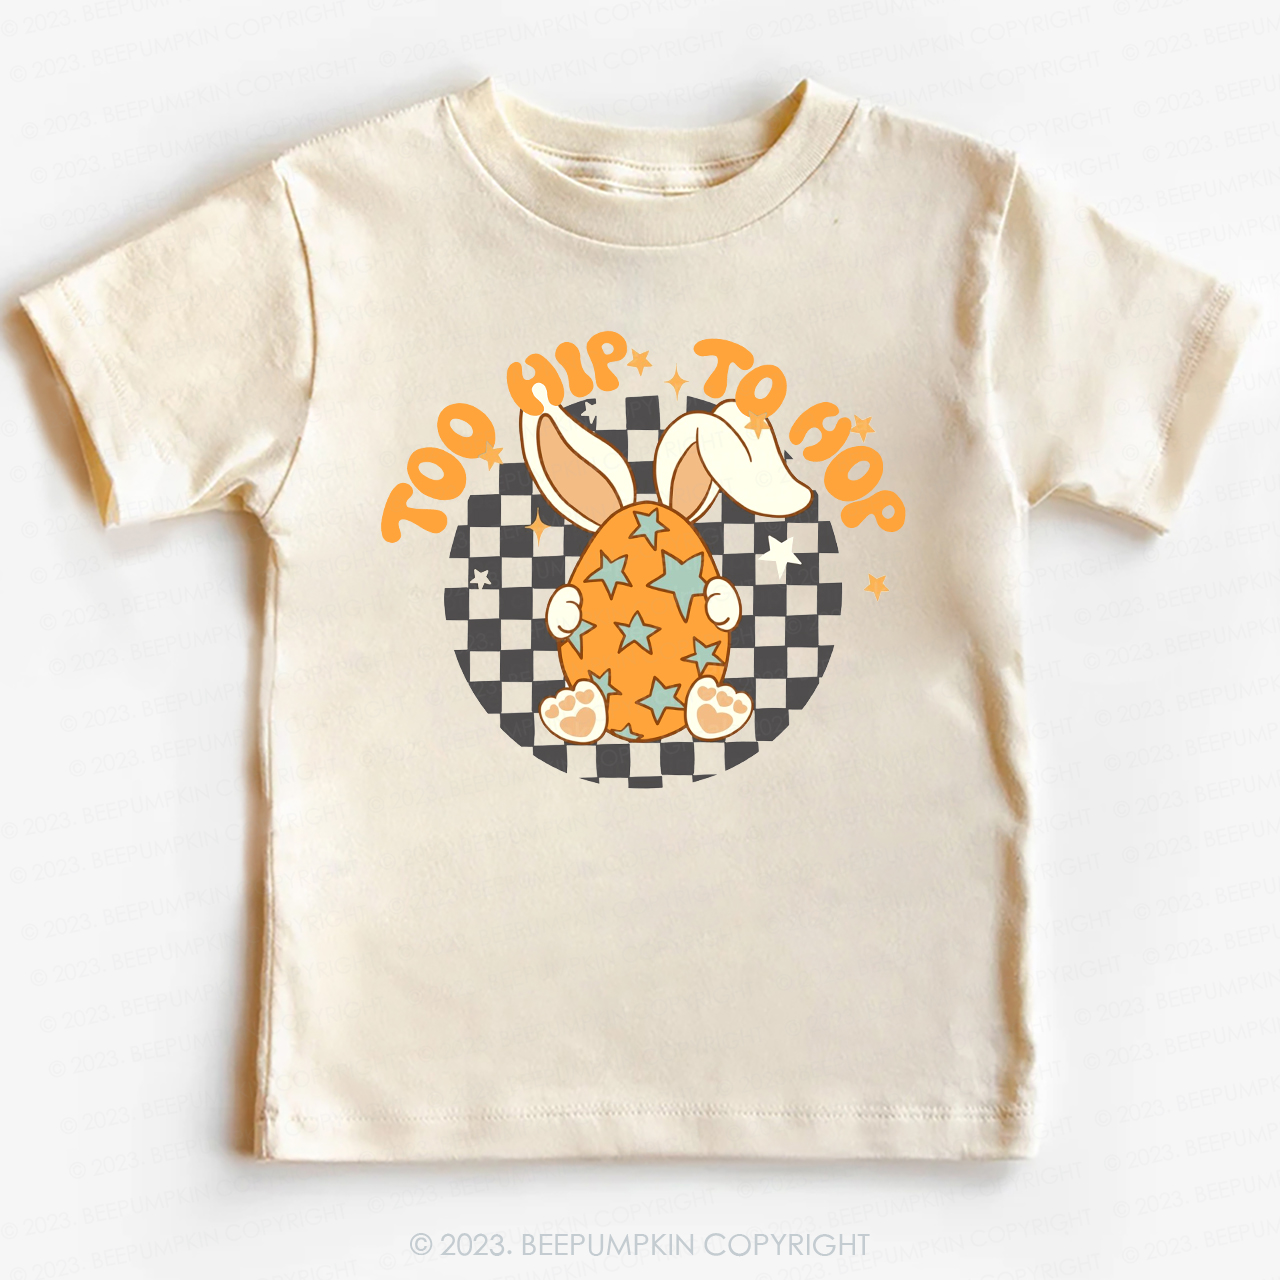 Hoppy Easter Too Hip To Hop-Toddler Tees